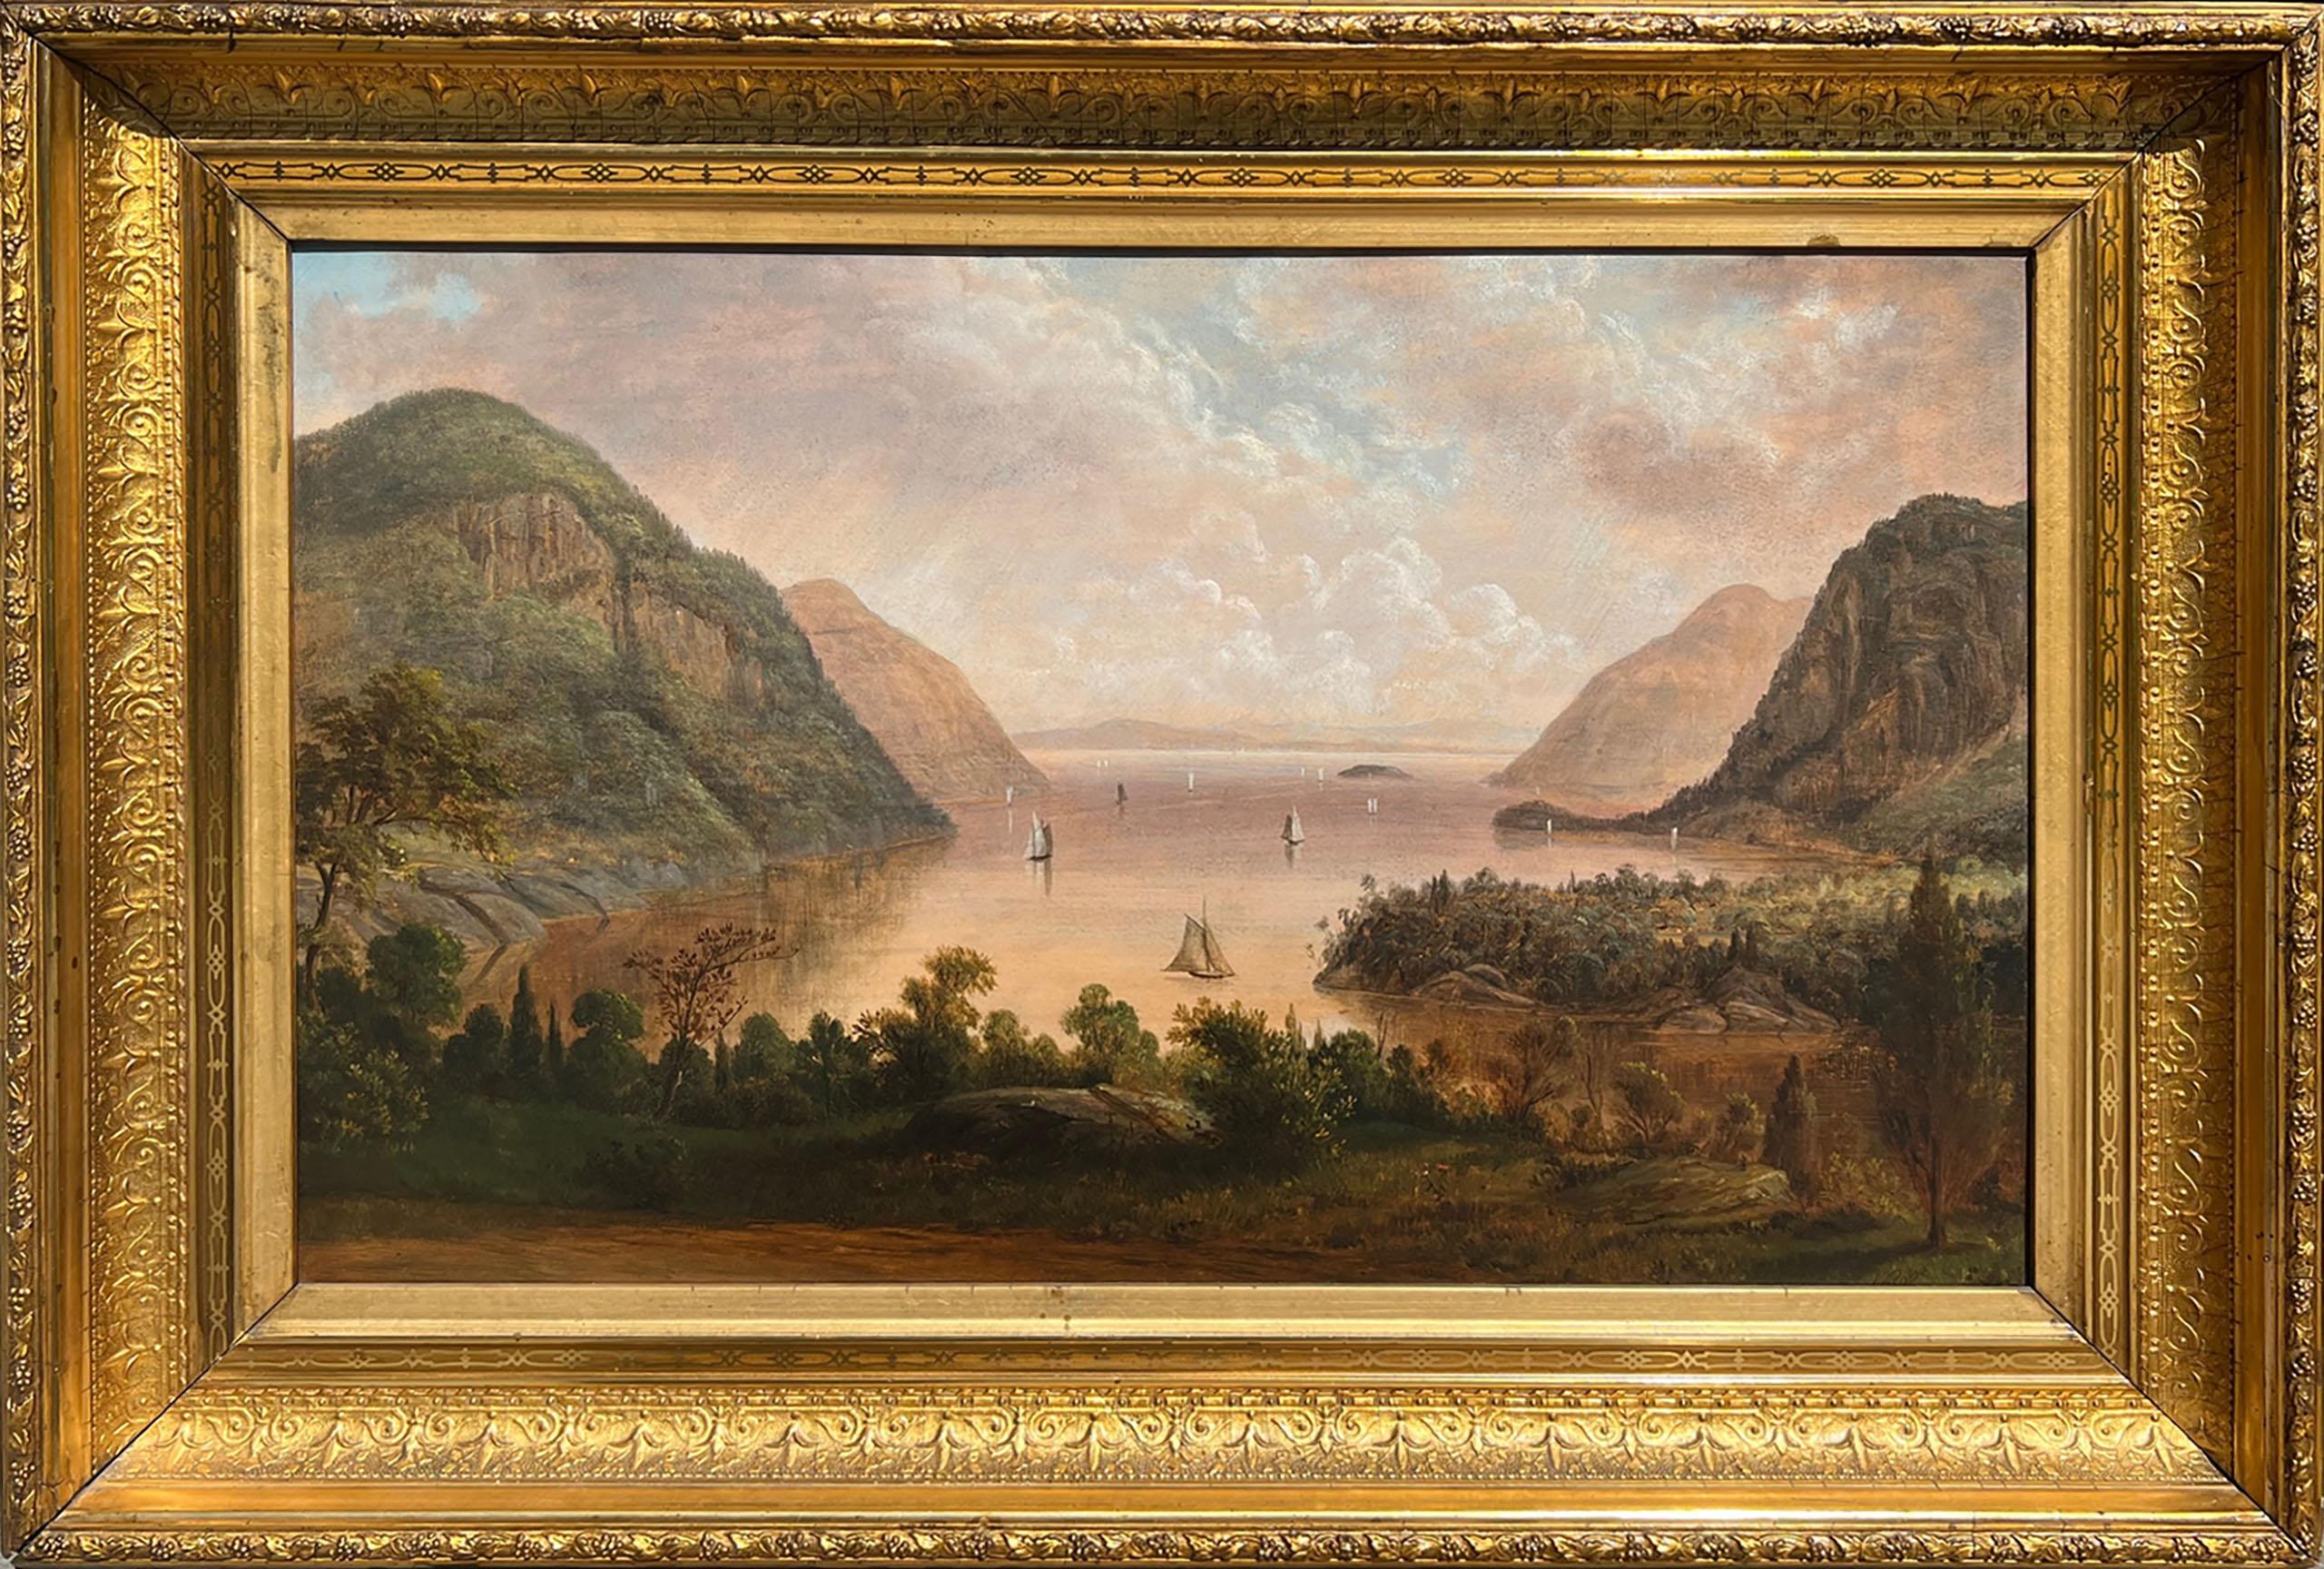 Thomas Benjamin Pope Landscape Painting - Highlands - Hudson River from West Point by Thomas B. Pope (American, 1834-1891)